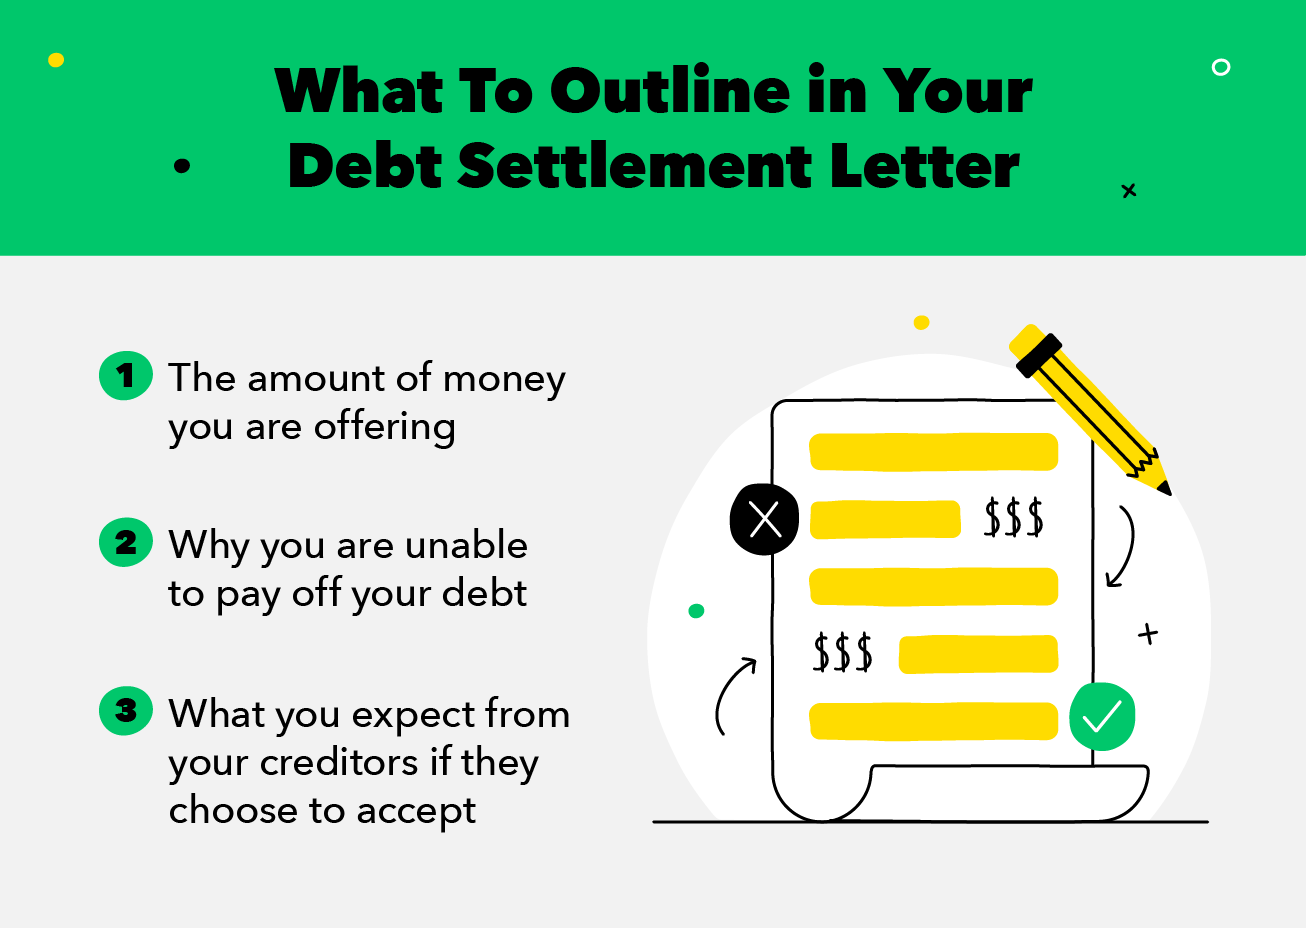 What To Outline in Your Debt Settlement Letter